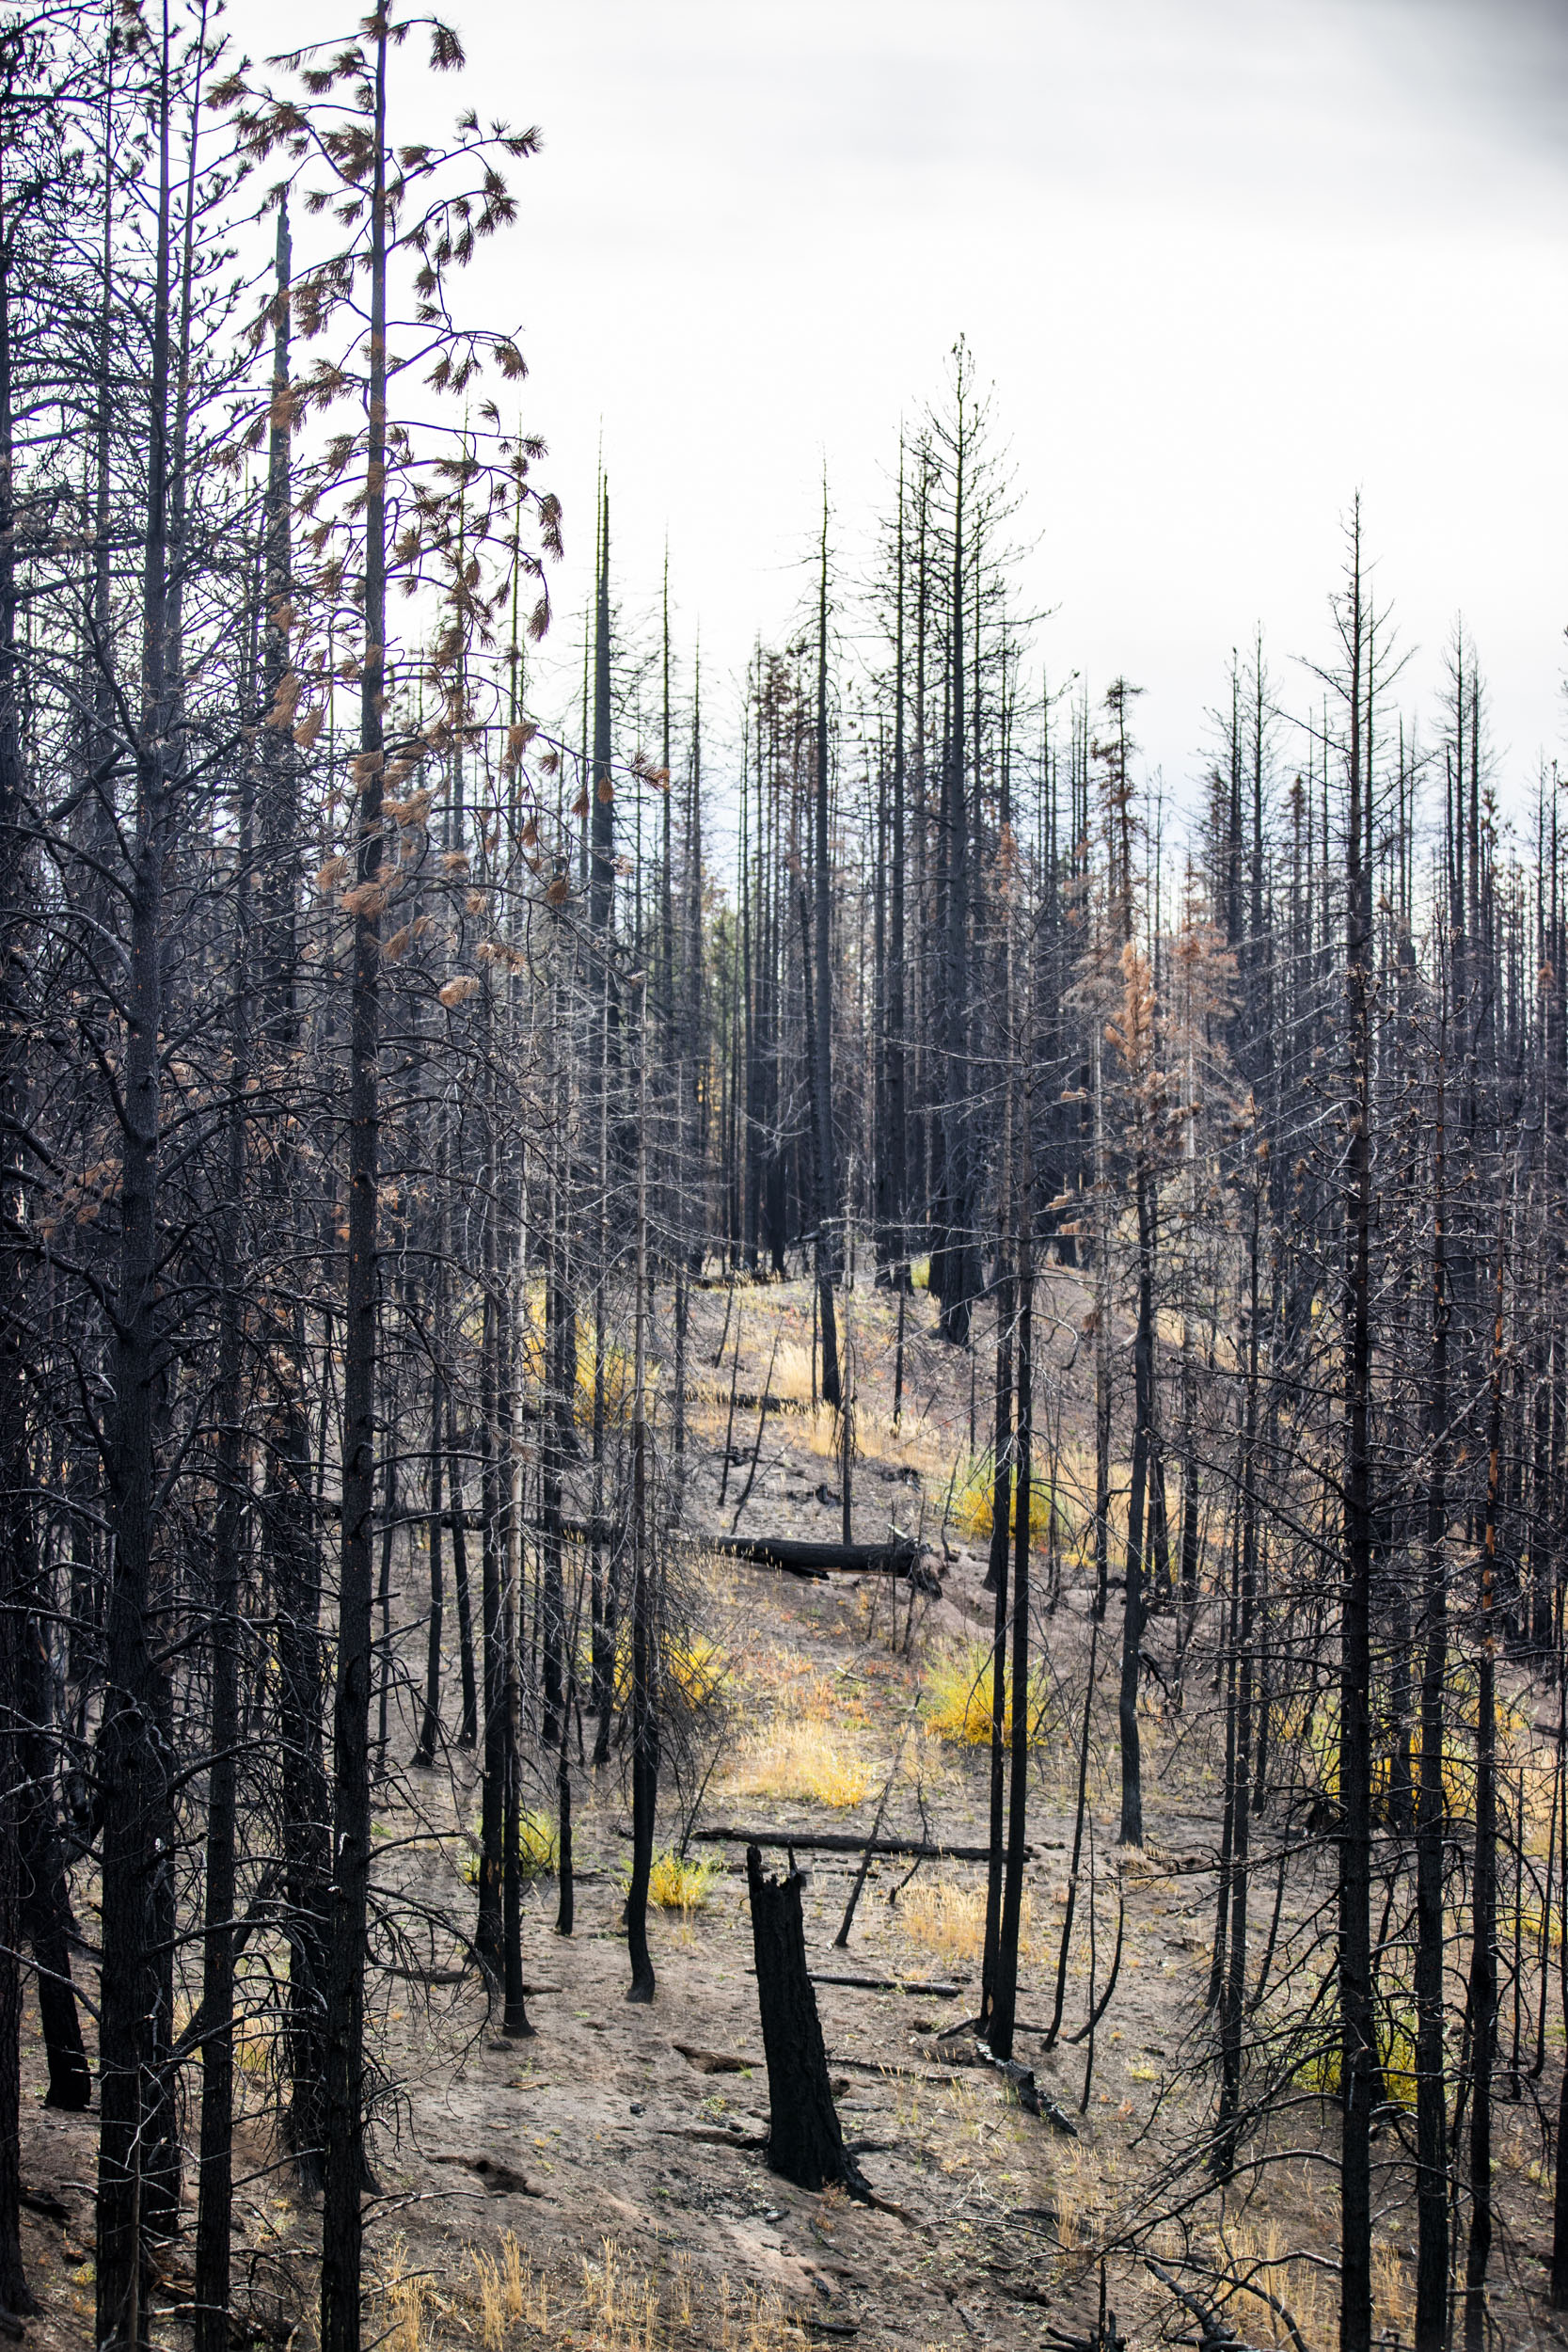 The site of the 2017 Jolley Mountain Fire is pictured on Wednesday, Oct. 24, 2018. The Department of Natural Resources is implementing a forest health treatment plan which uses dying forest for cross laminated timber. Franz says this plan will also help keep the cost of wildfire suppression down and make forests more resilient to wildfires. (Photo by Dorothy Edwards/Crosscut)